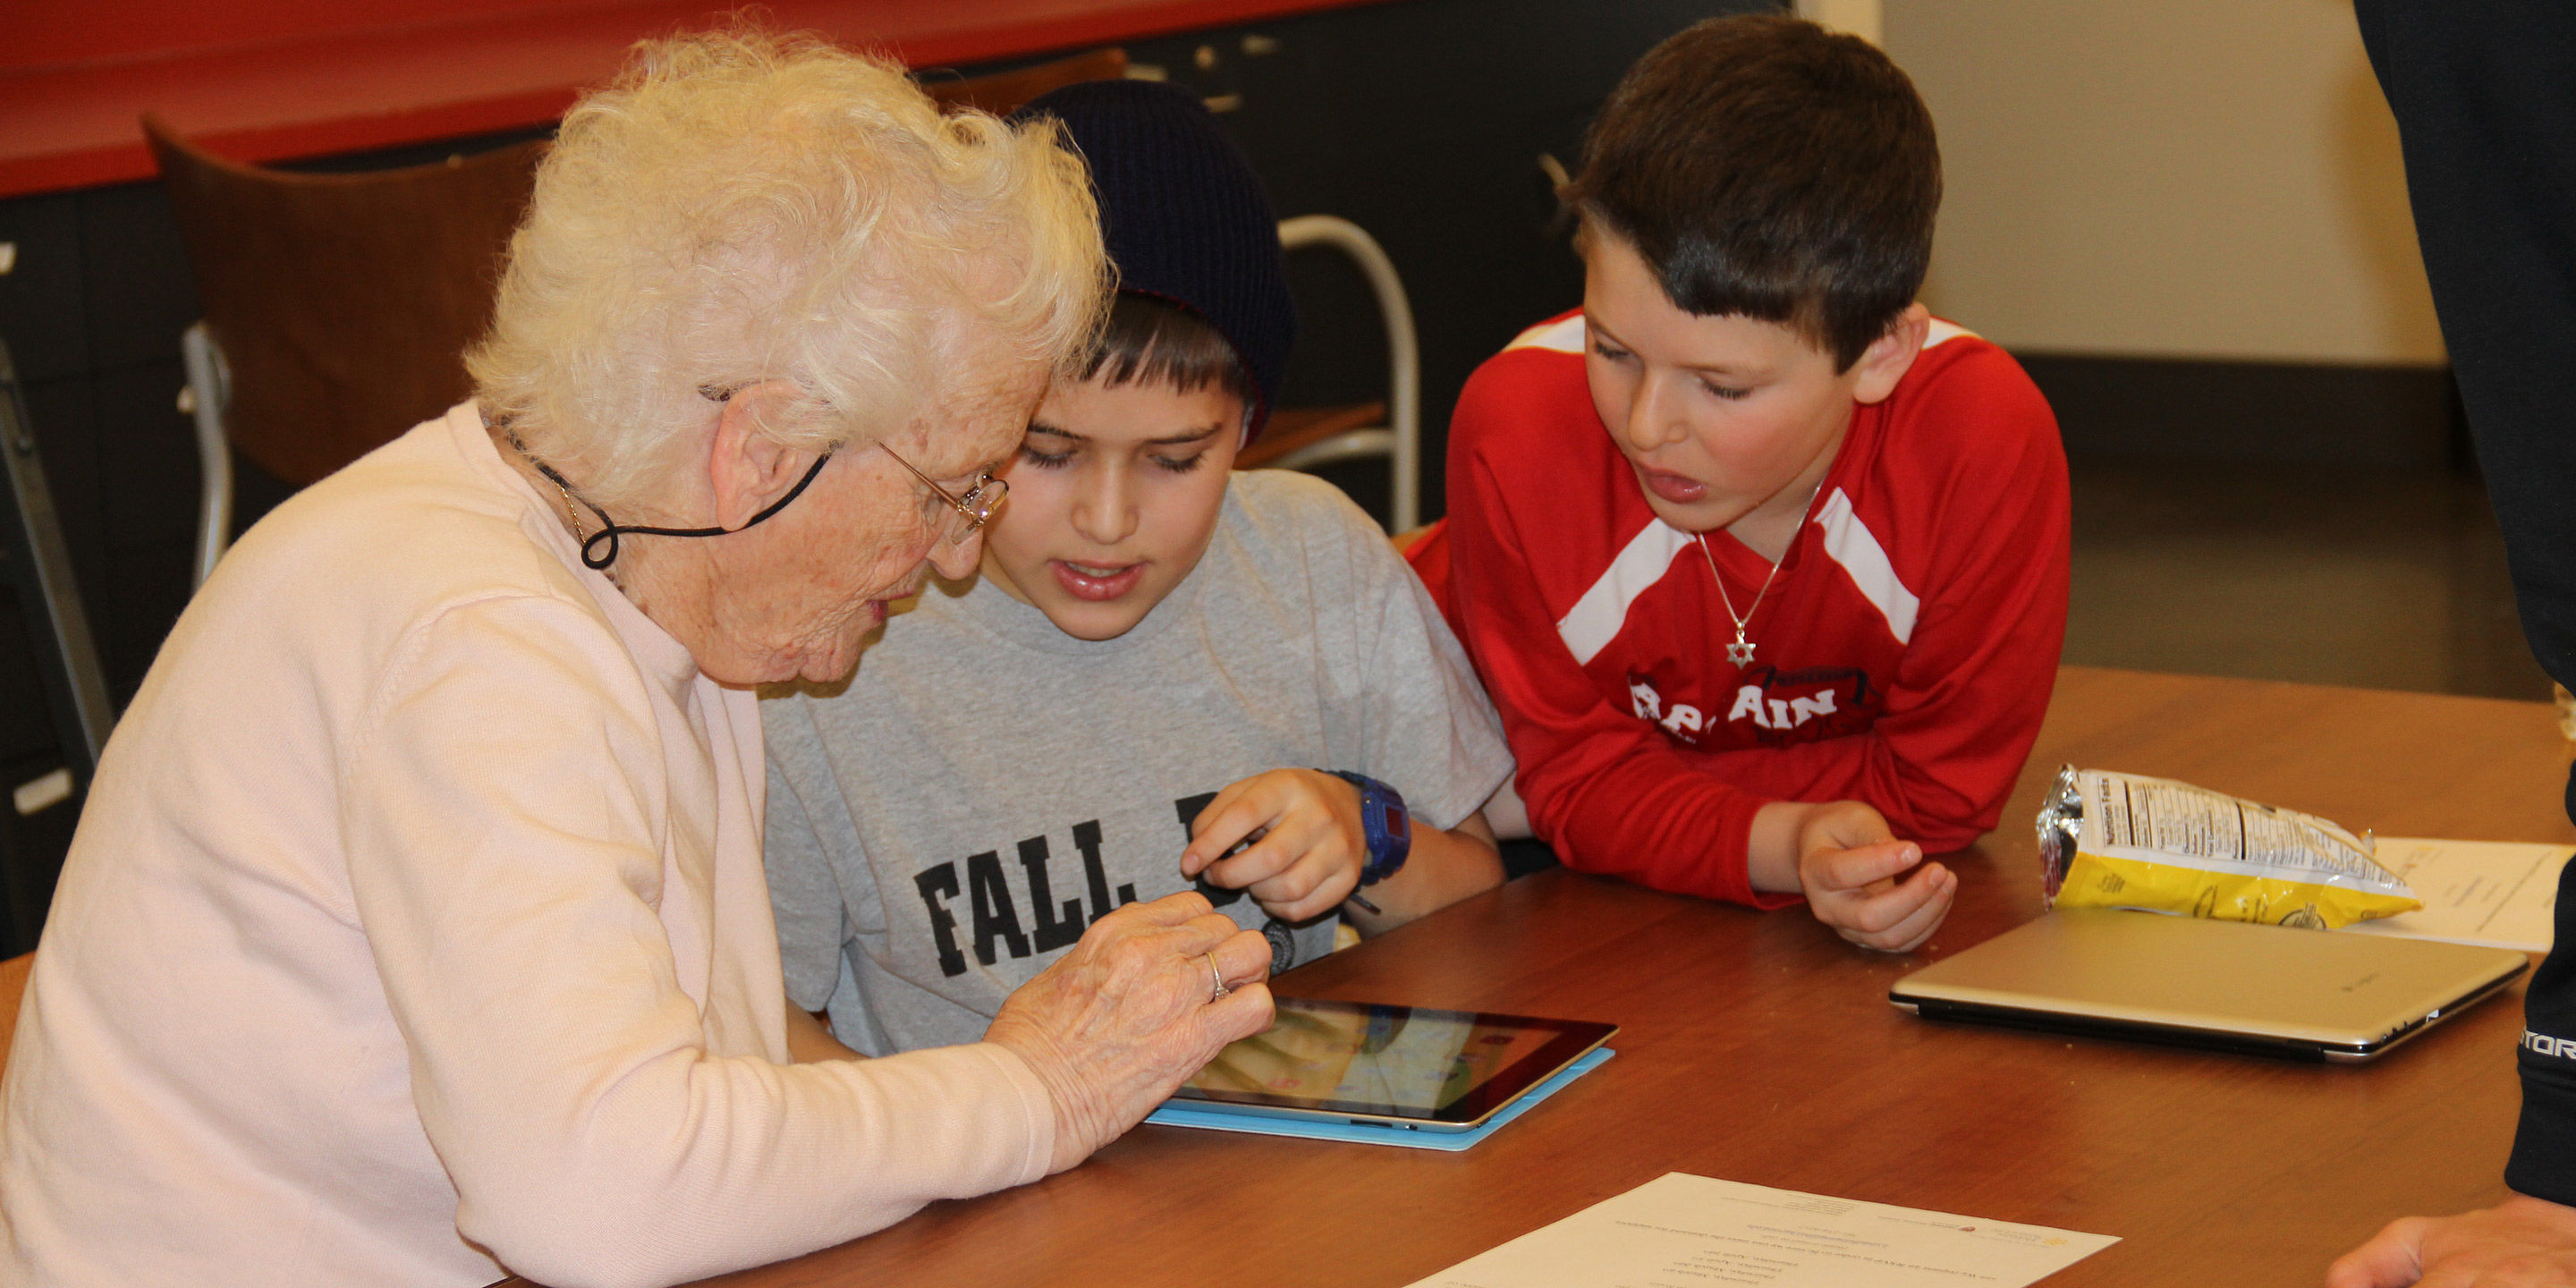 An older person and two middle school students sit at a table, looking at a tablet together.